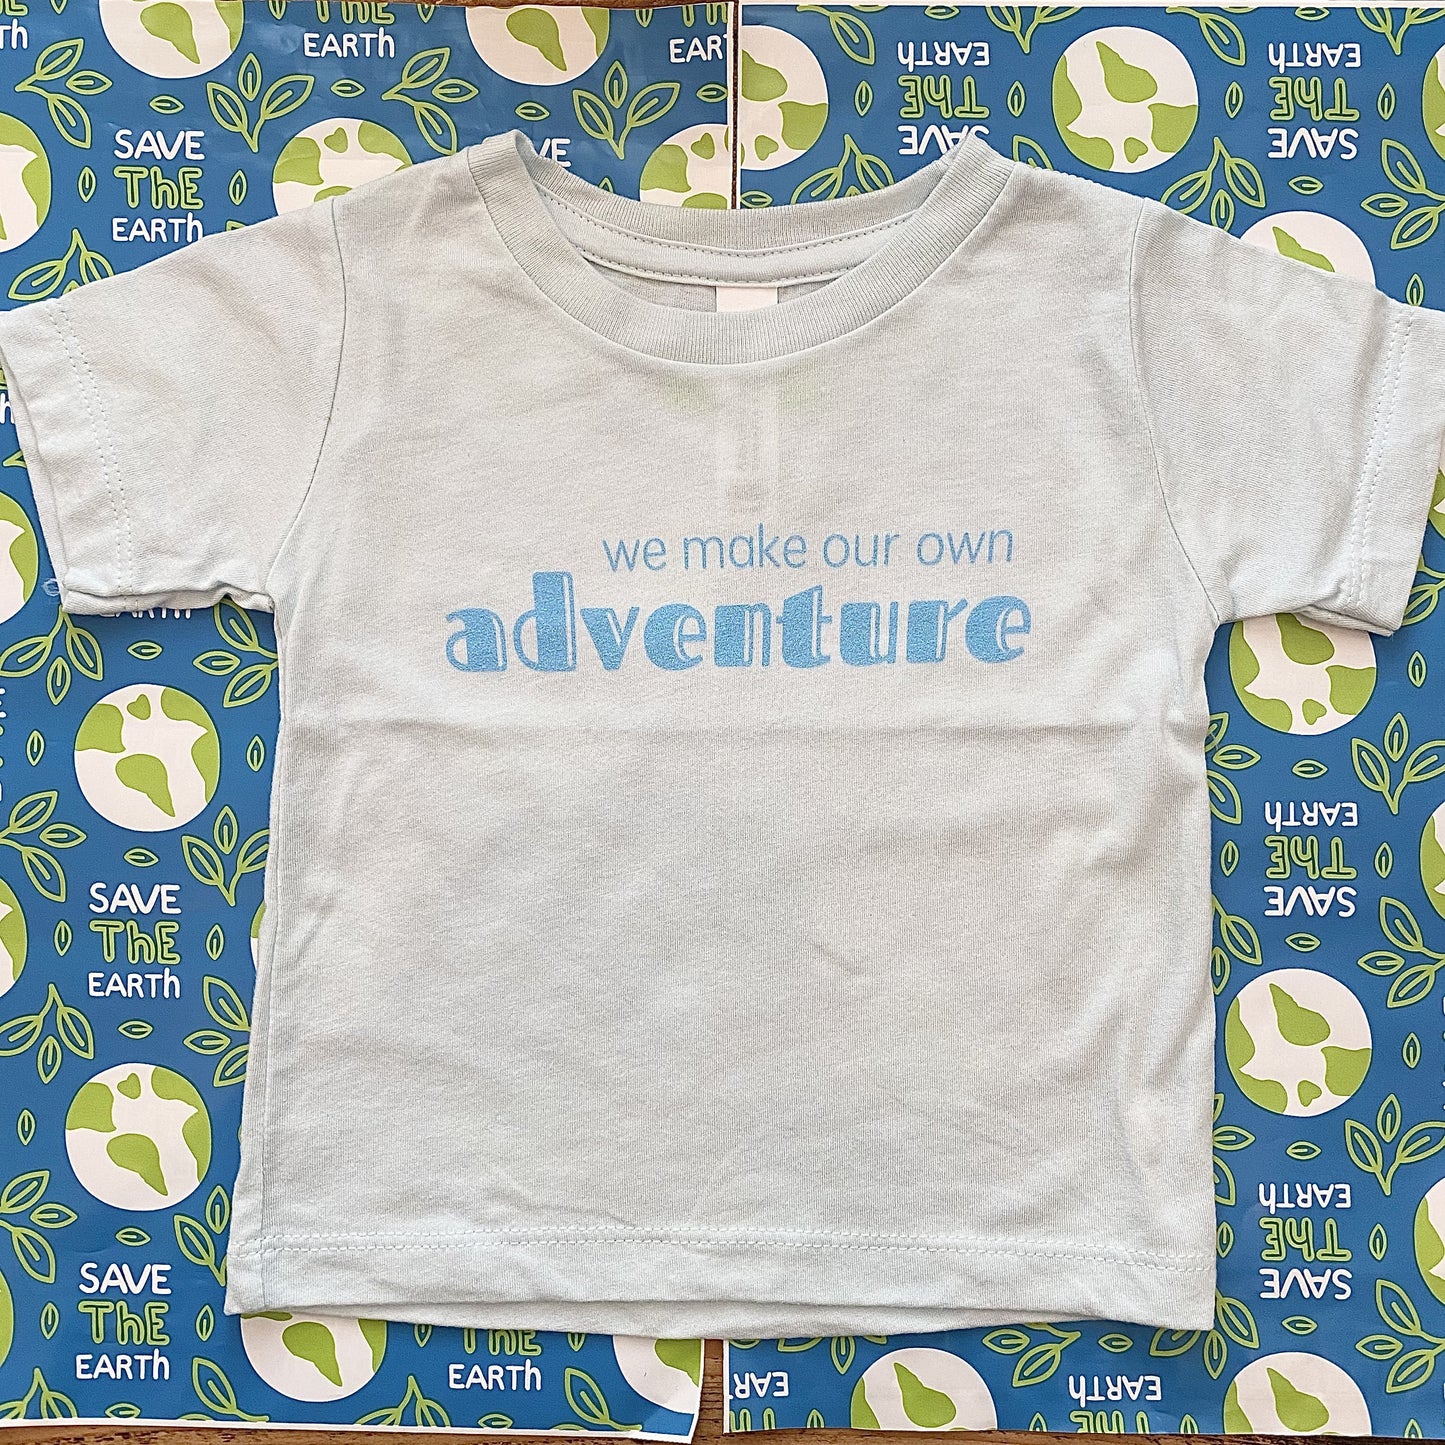 WE MAKE OUR OWN ADVENTURE - Short Sleeve Toddler T Shirt - Little Mate Adventures